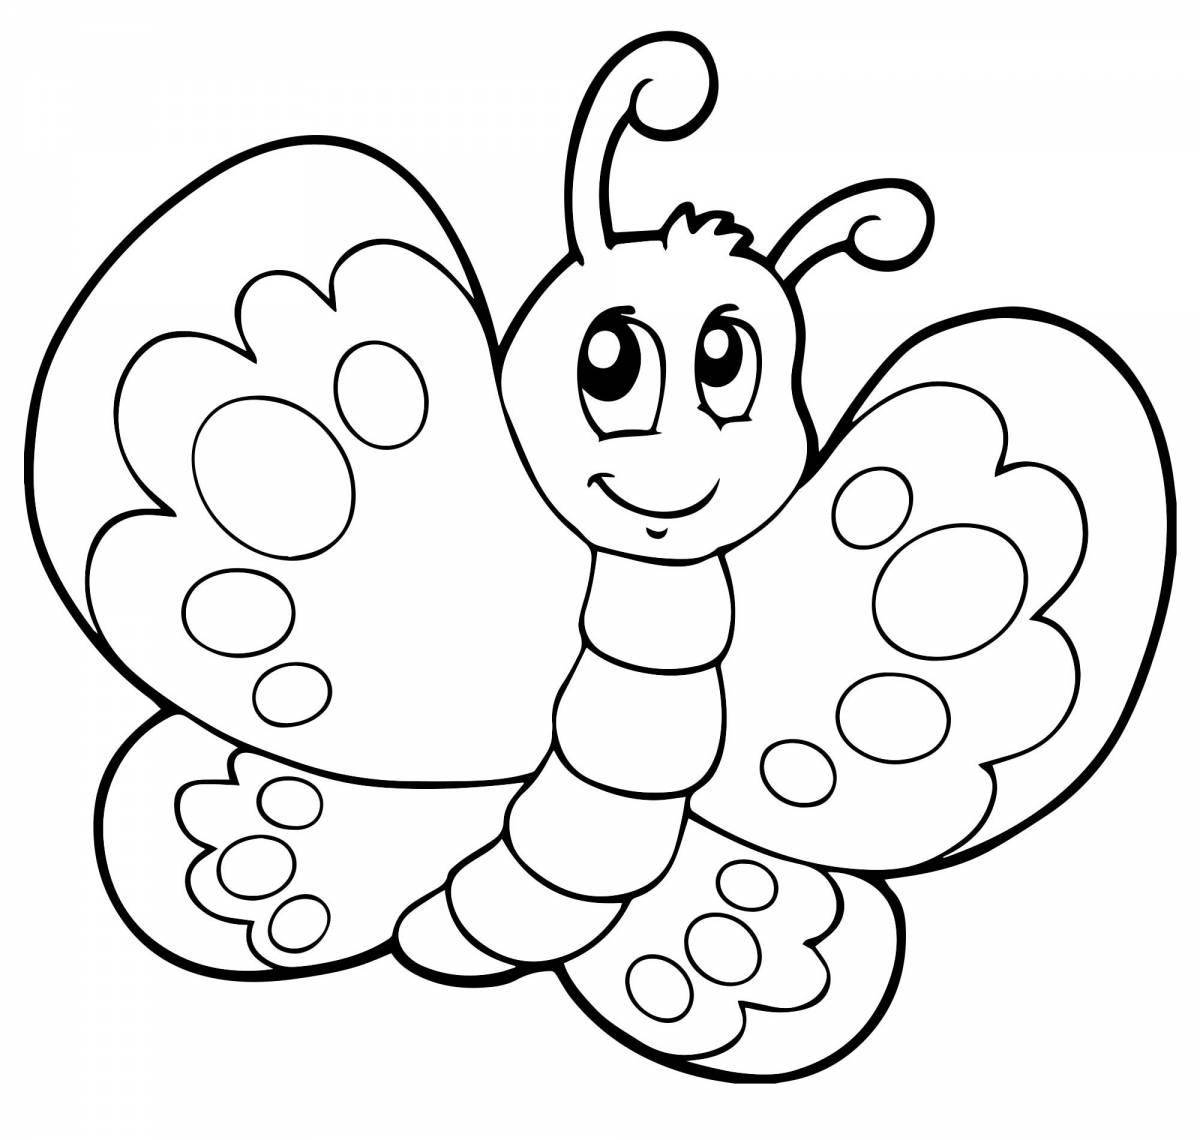 Adorable butterfly coloring book for kids